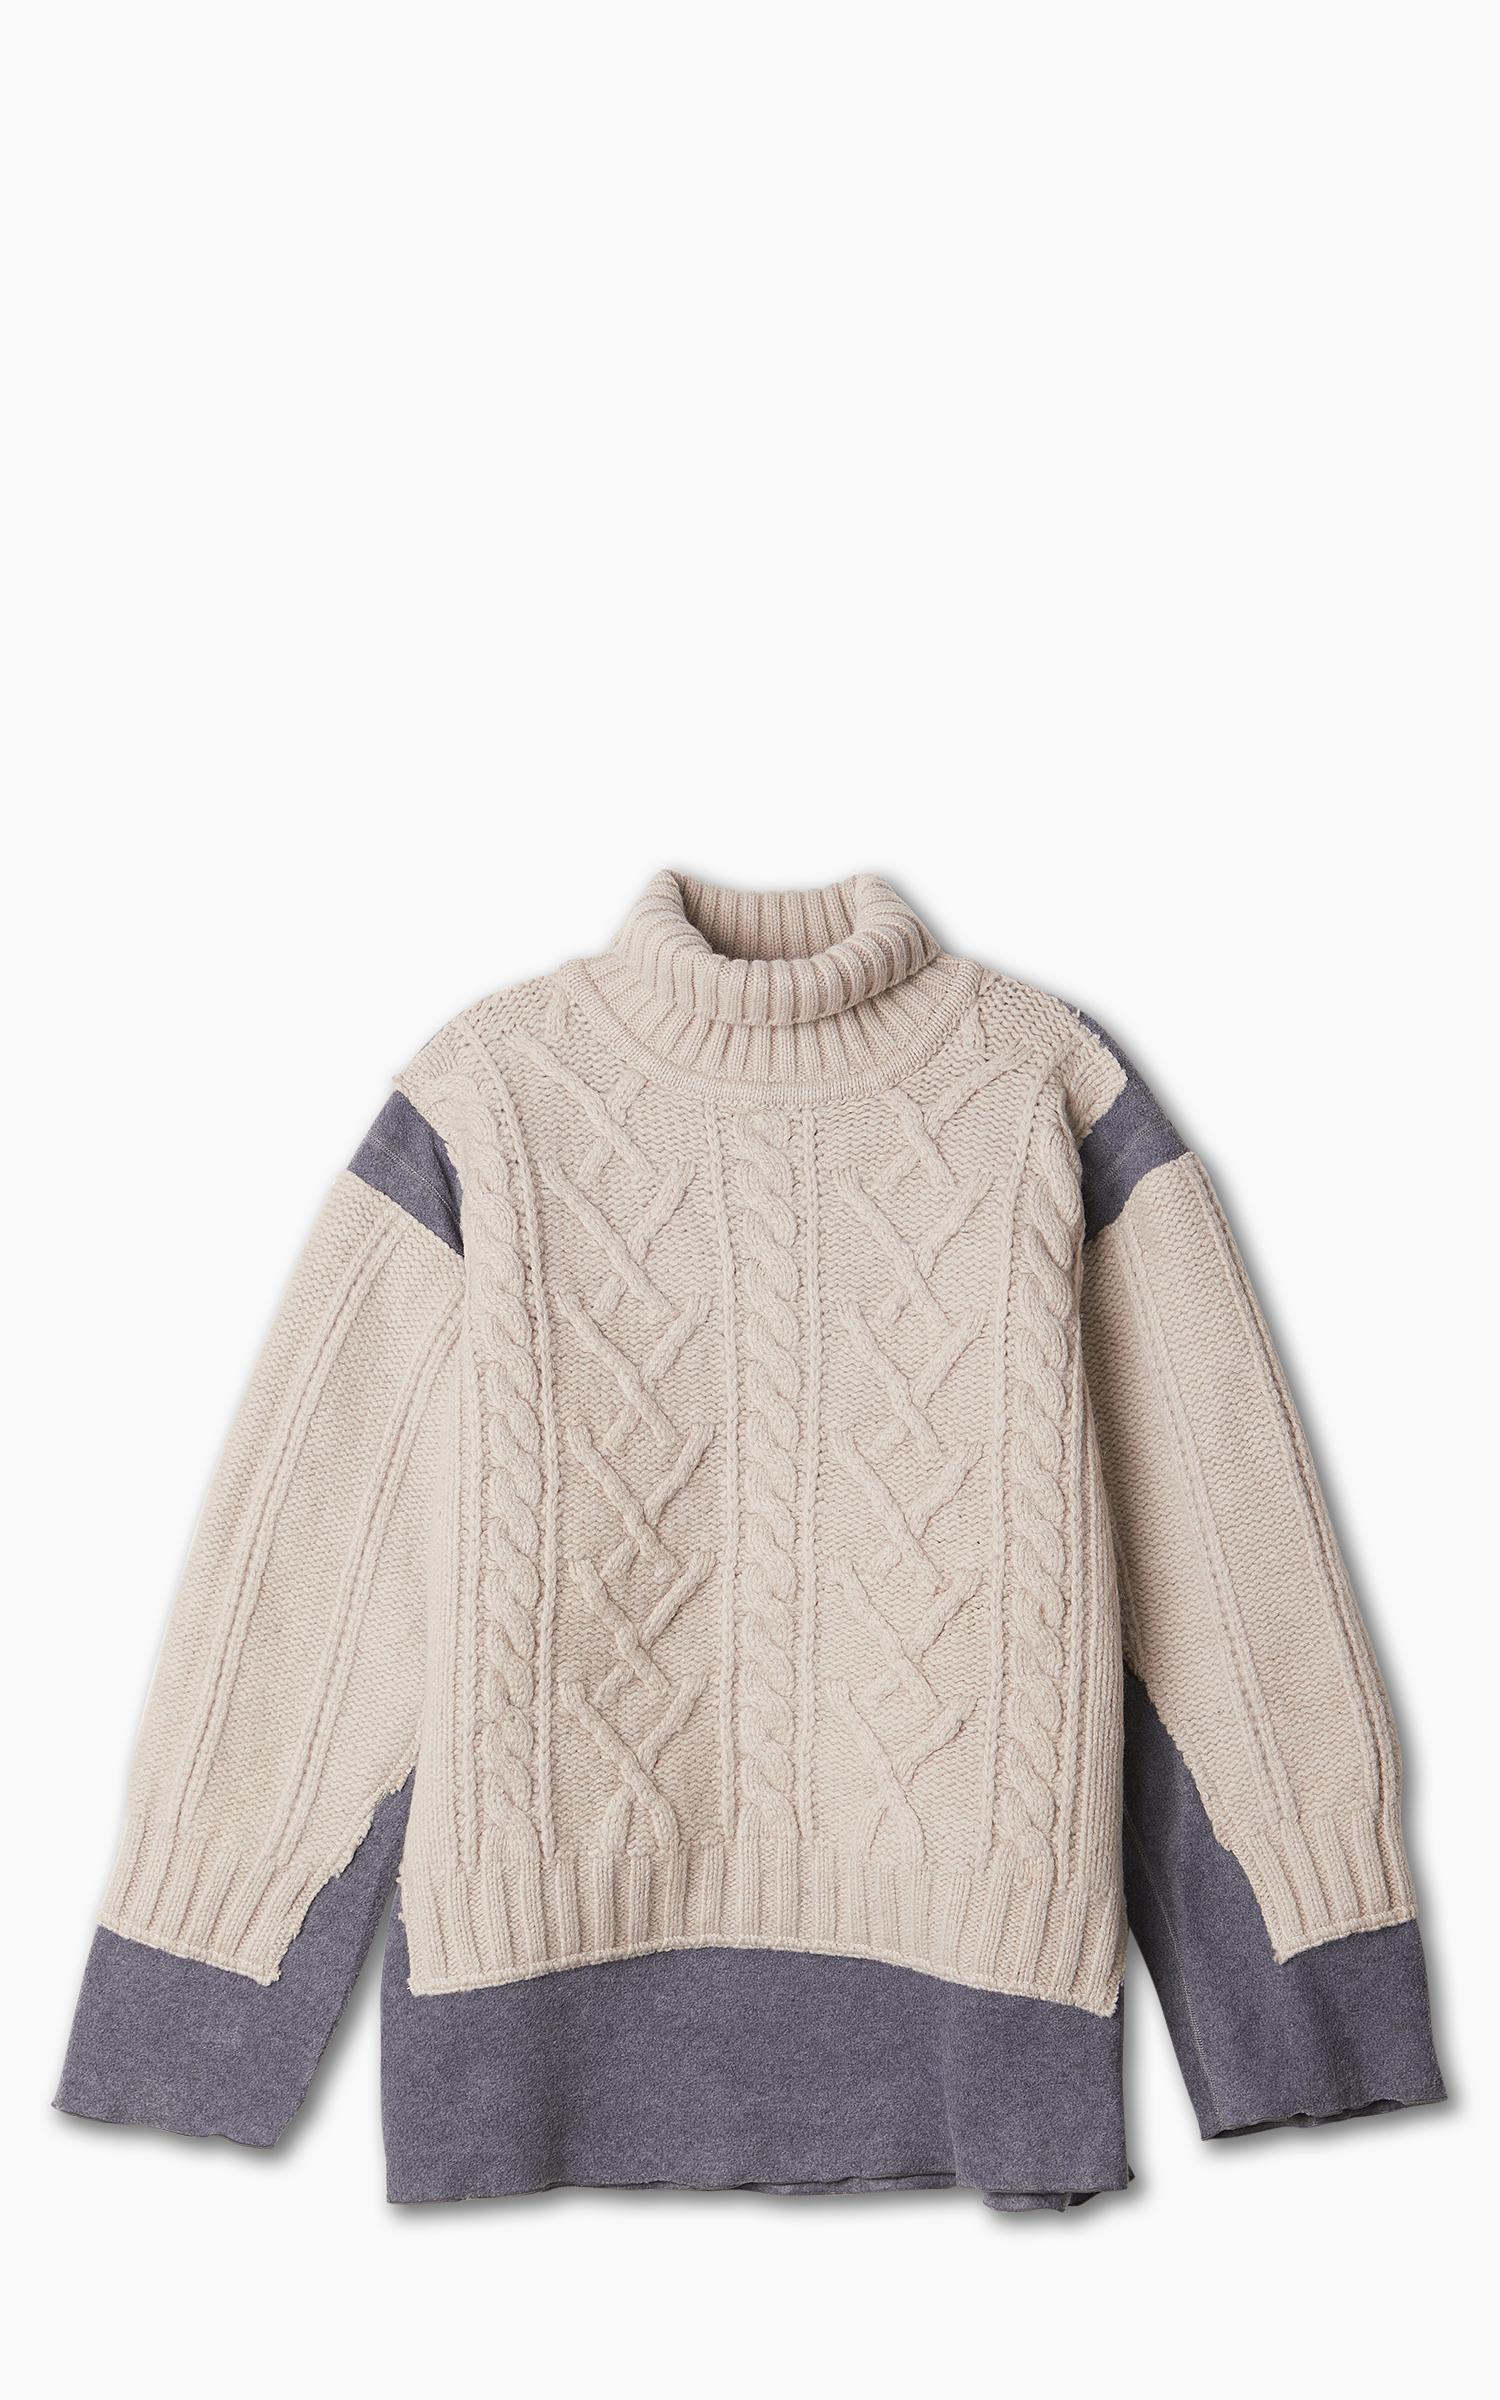 Quince Try-On: Cashmere Fisherman Crewneck Sweater - Welcome Objects